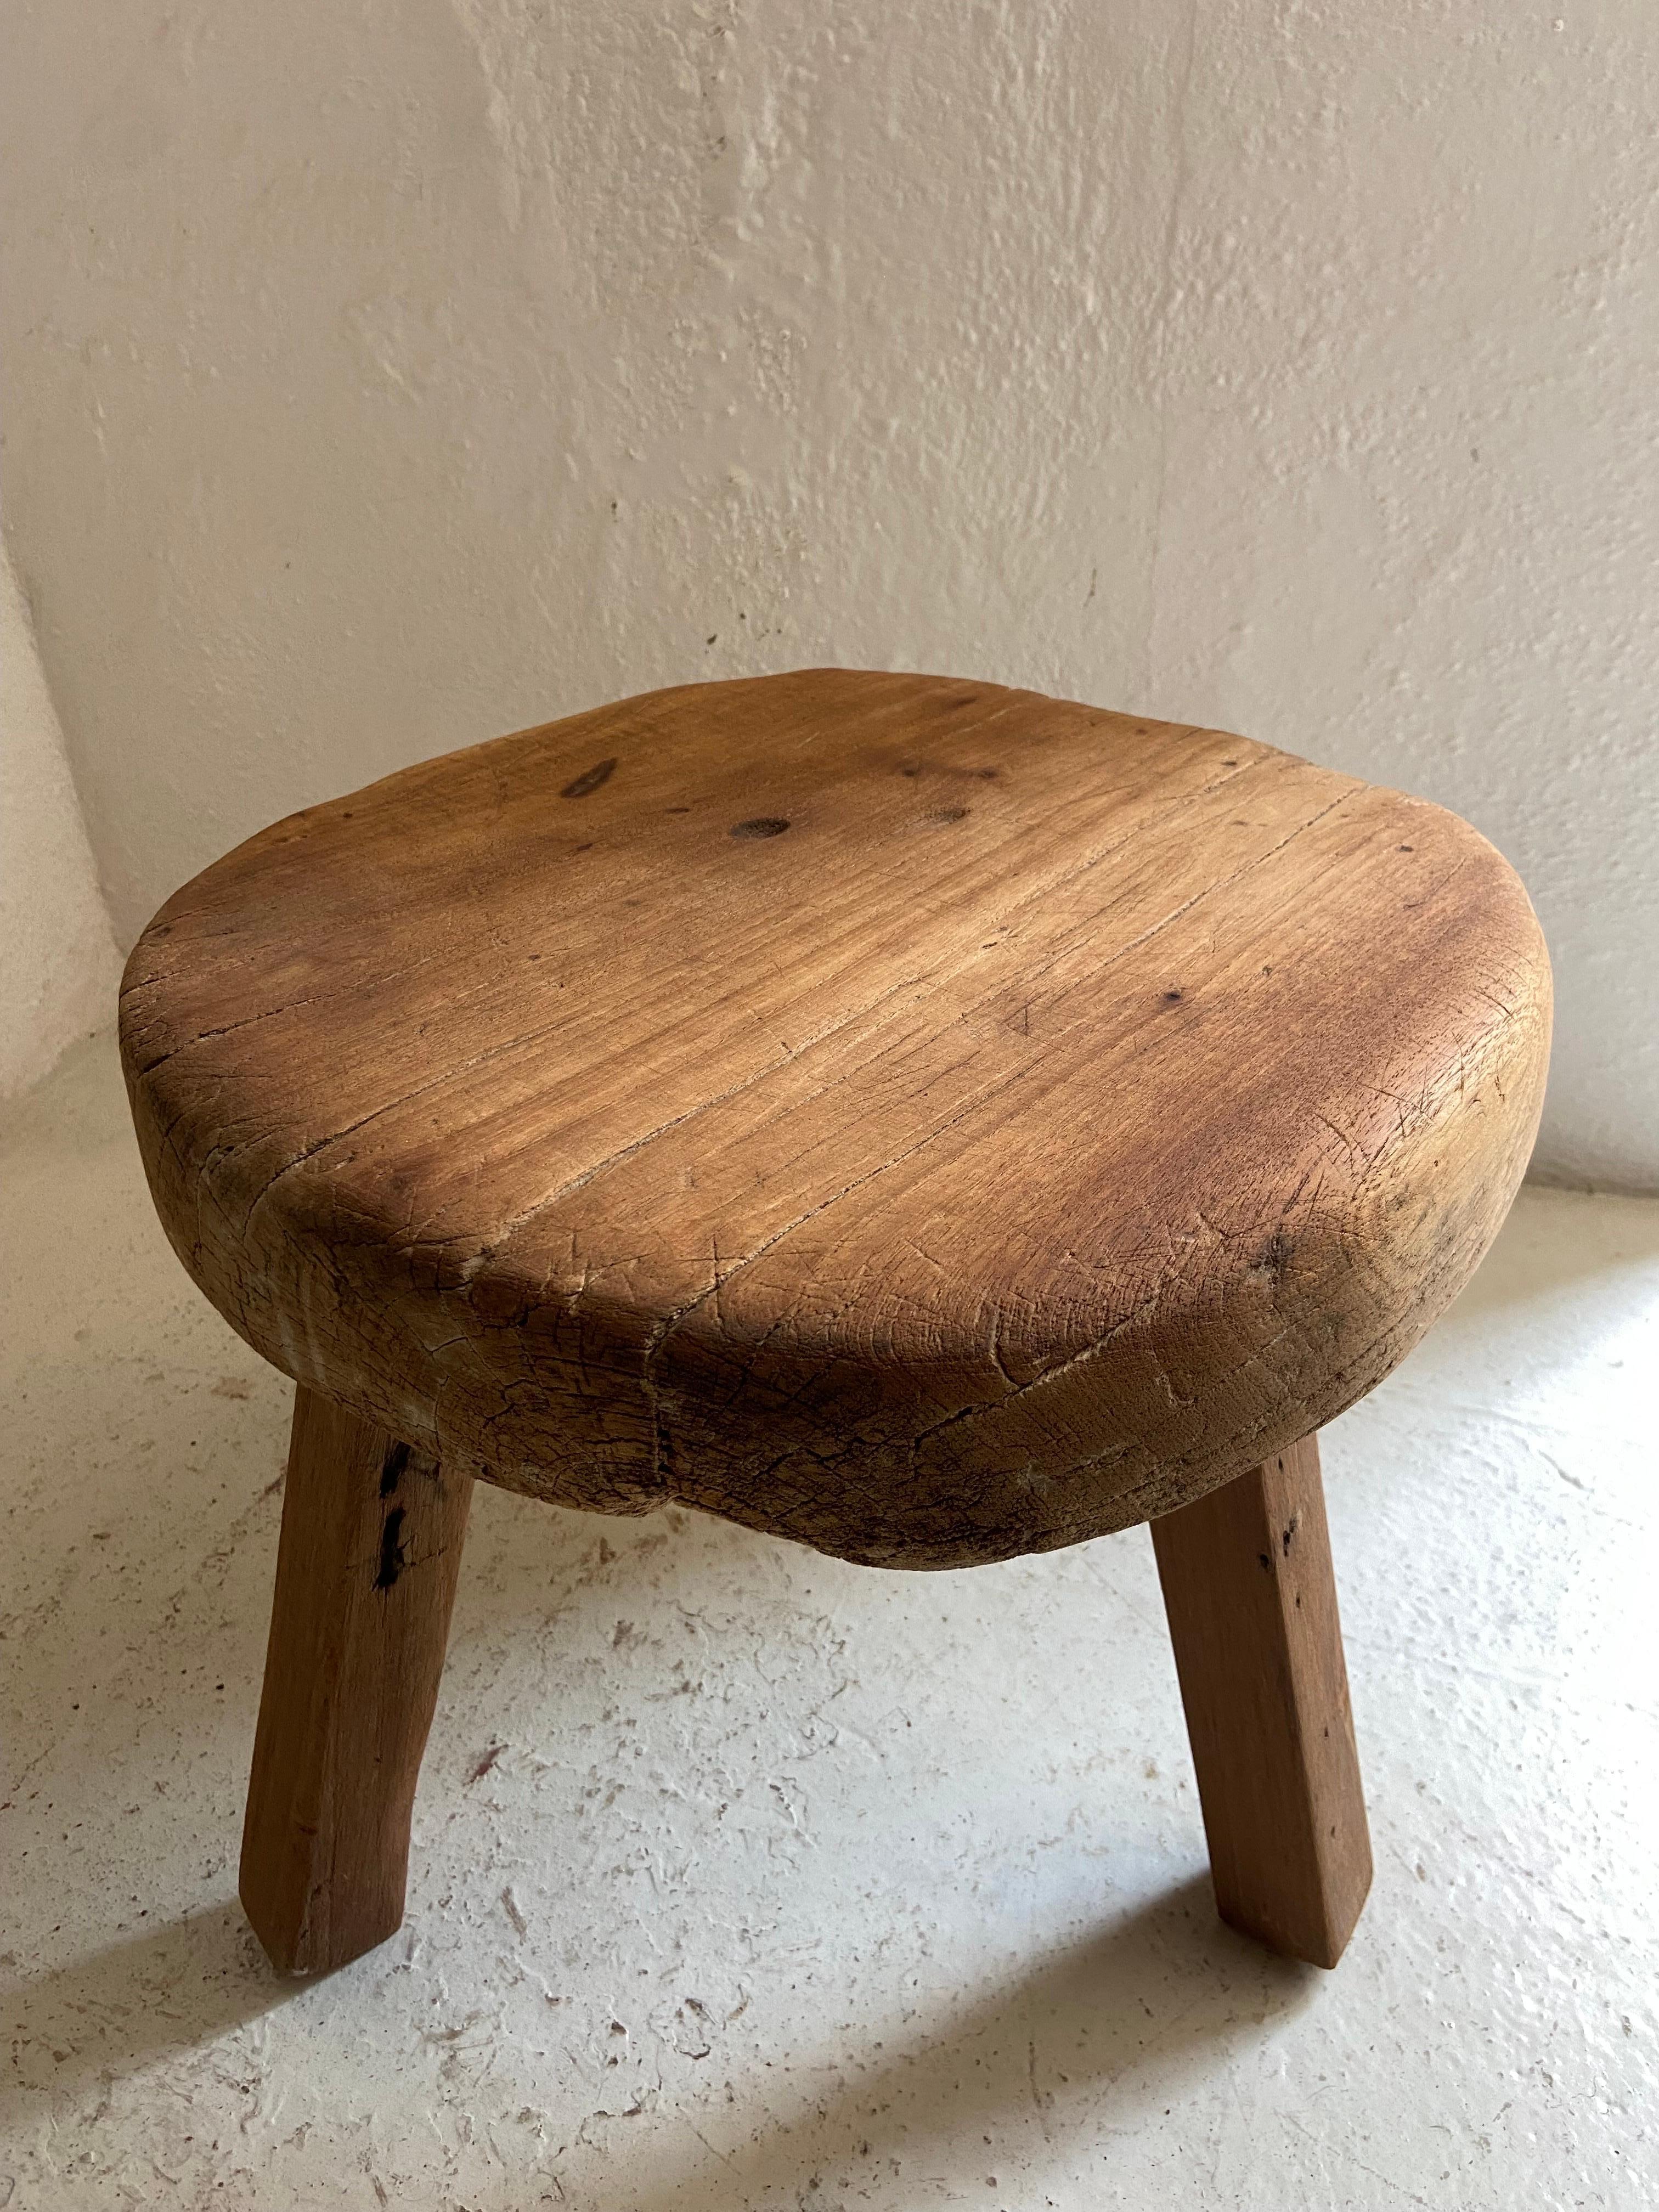 Primitive style round table from Yucatan, Mexico, circa 1980's. The legs are not original. They are fabricated out of reclaimed beams. The table top is irregular with strong character.